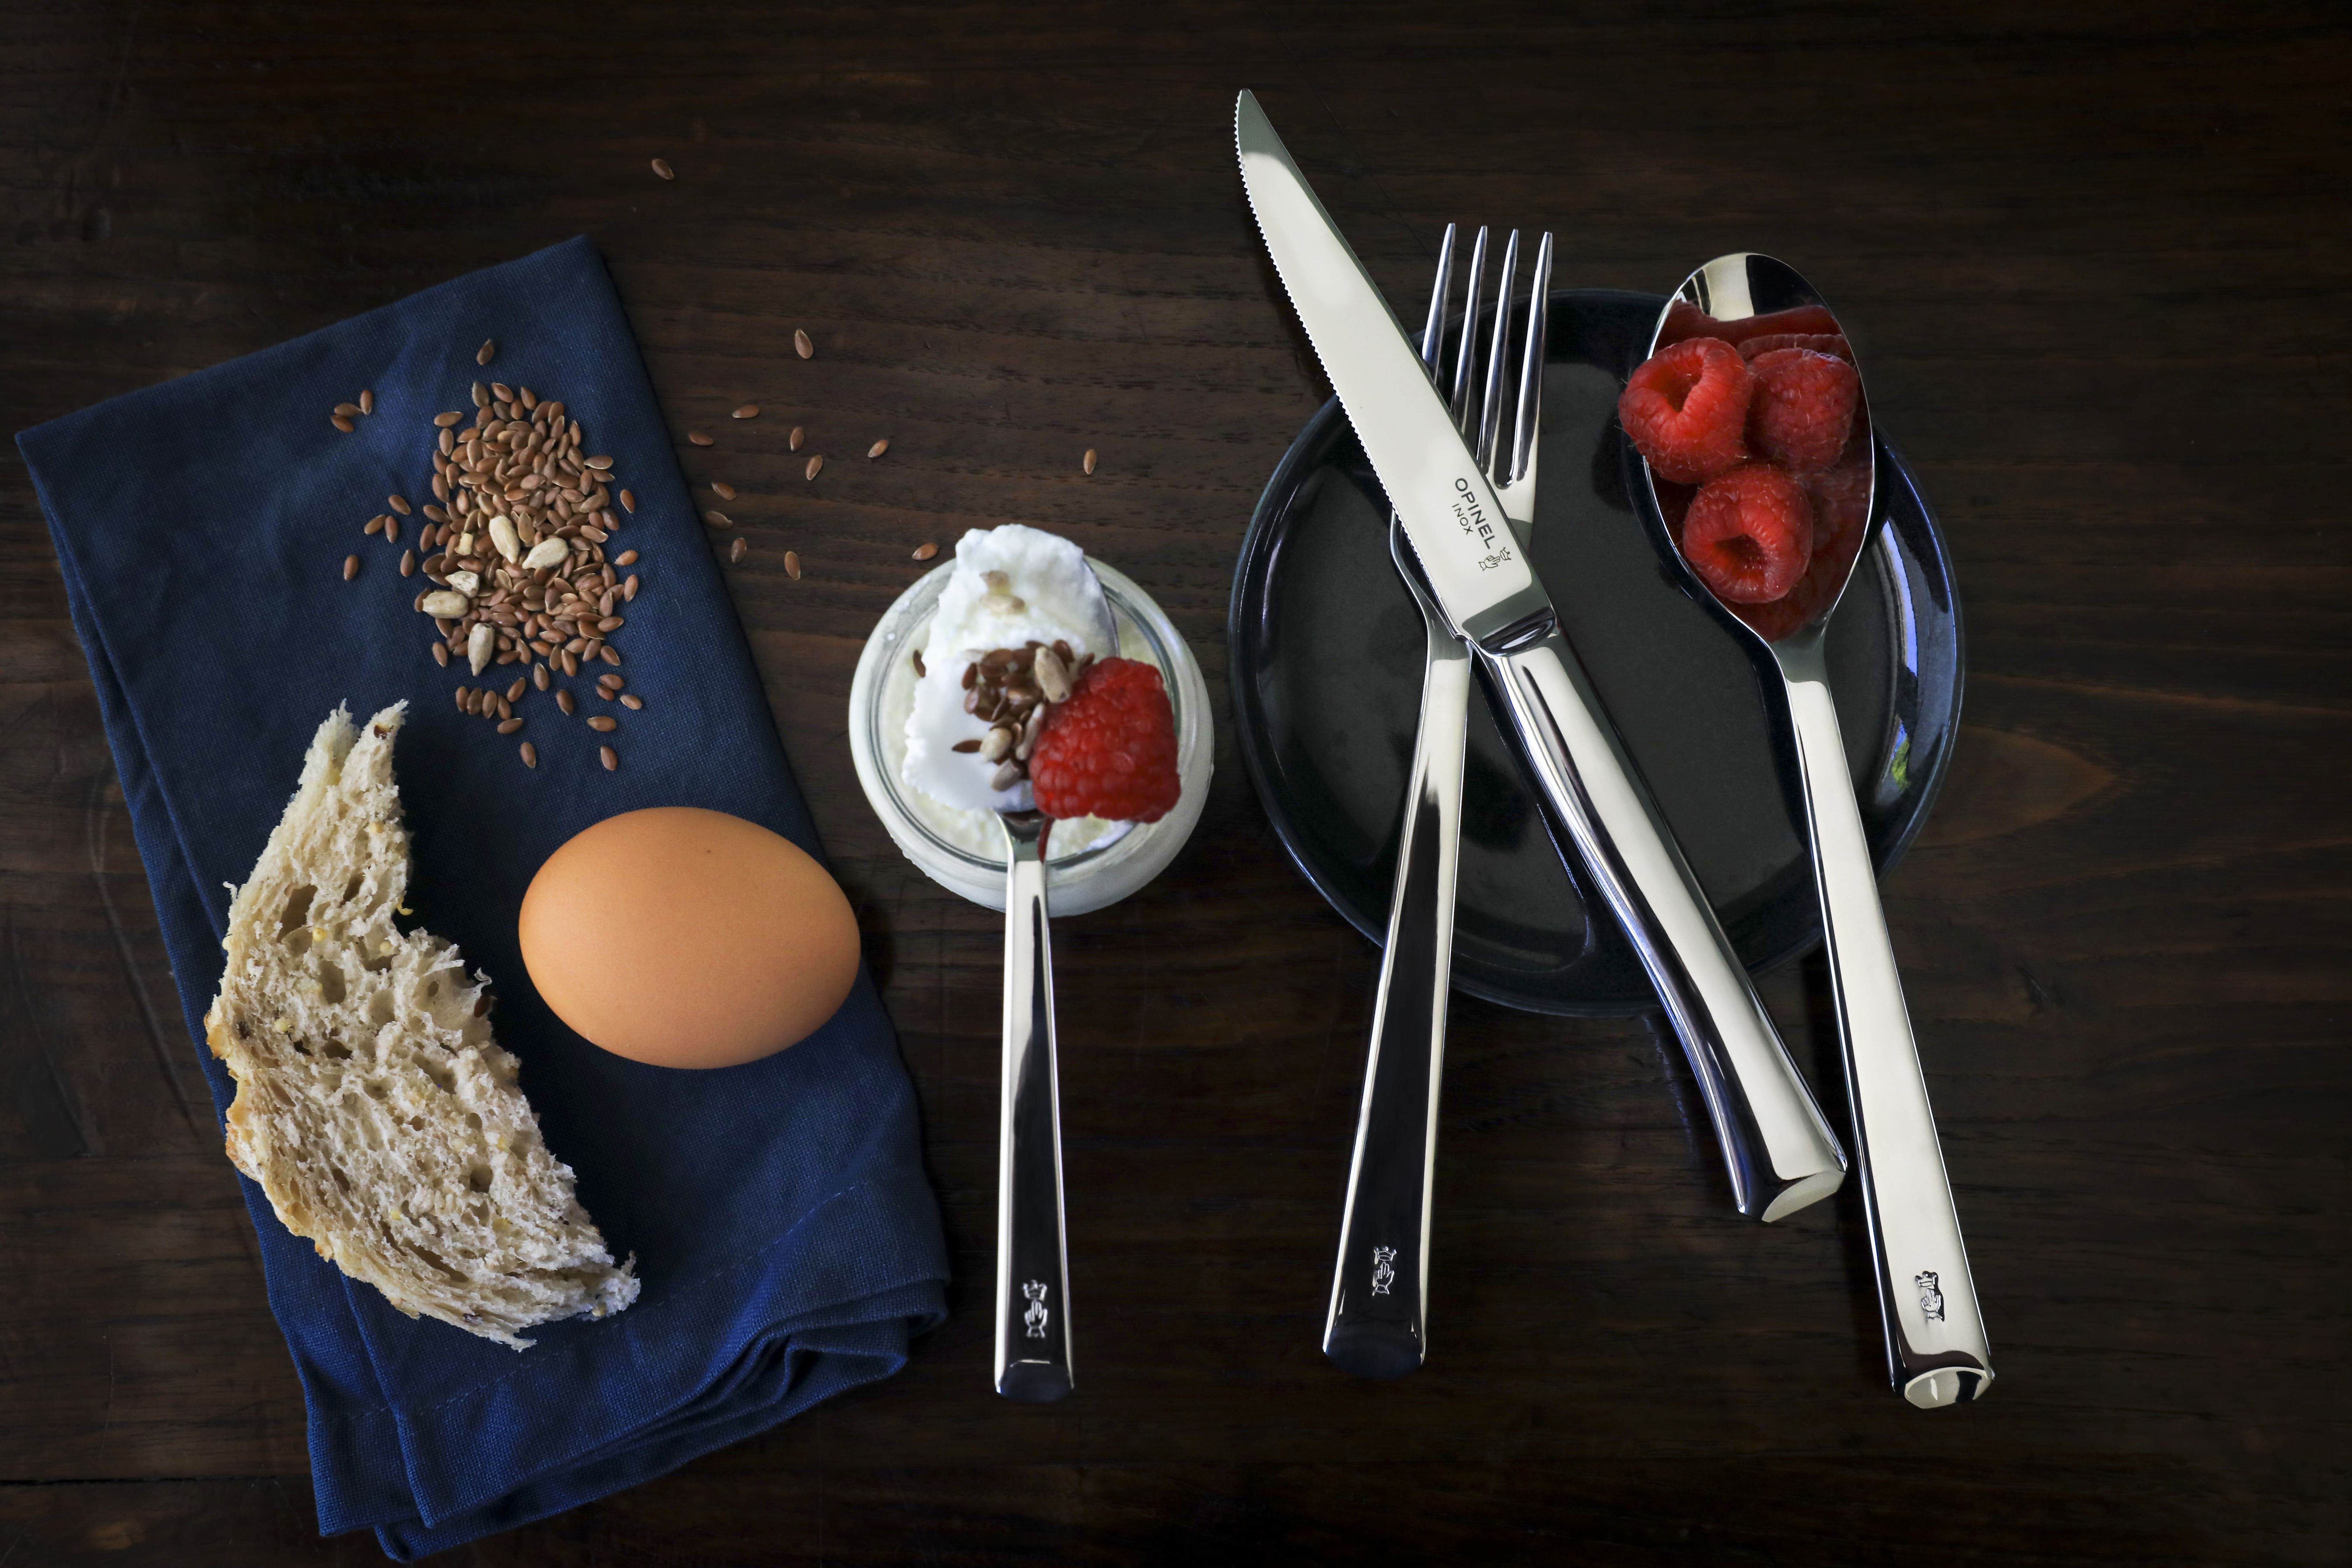 Opinel flatware set with toast, egg and berries